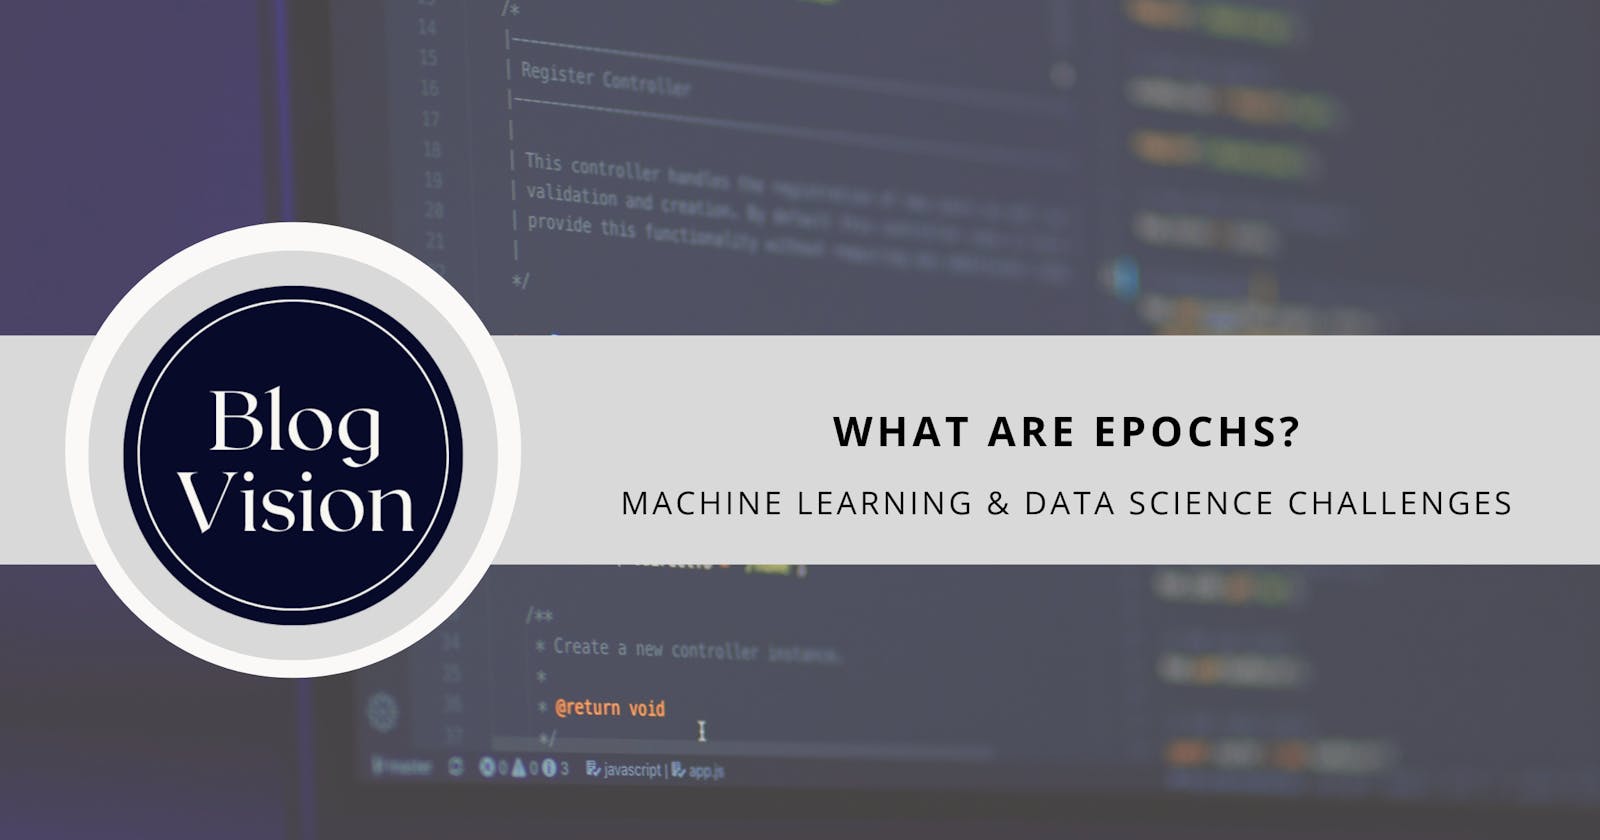 #68 Machine Learning & Data Science Challenge 68